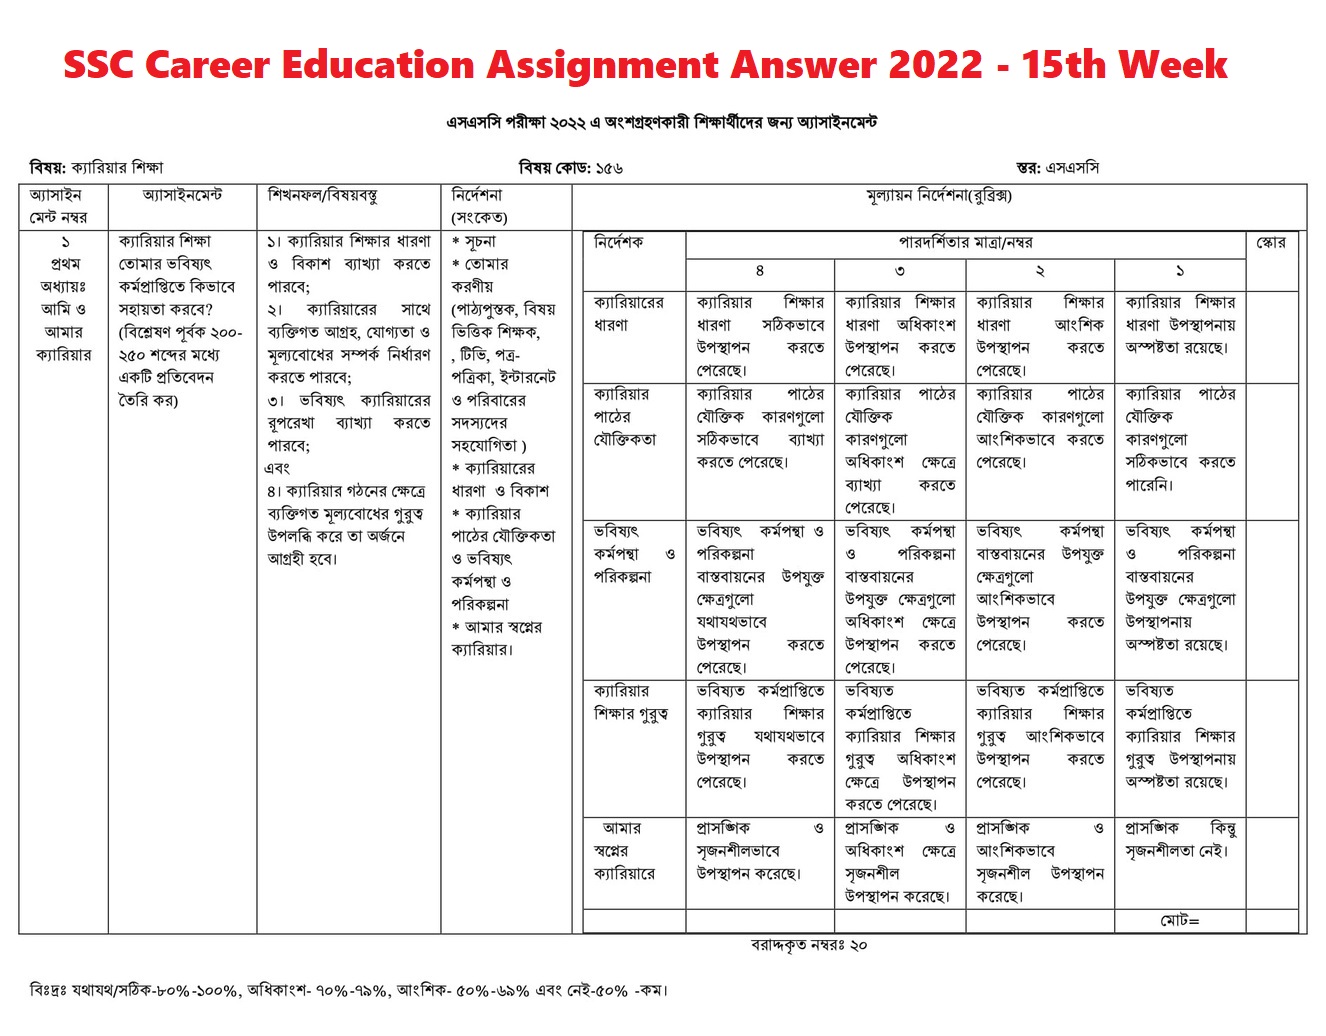 ssc career education assignment